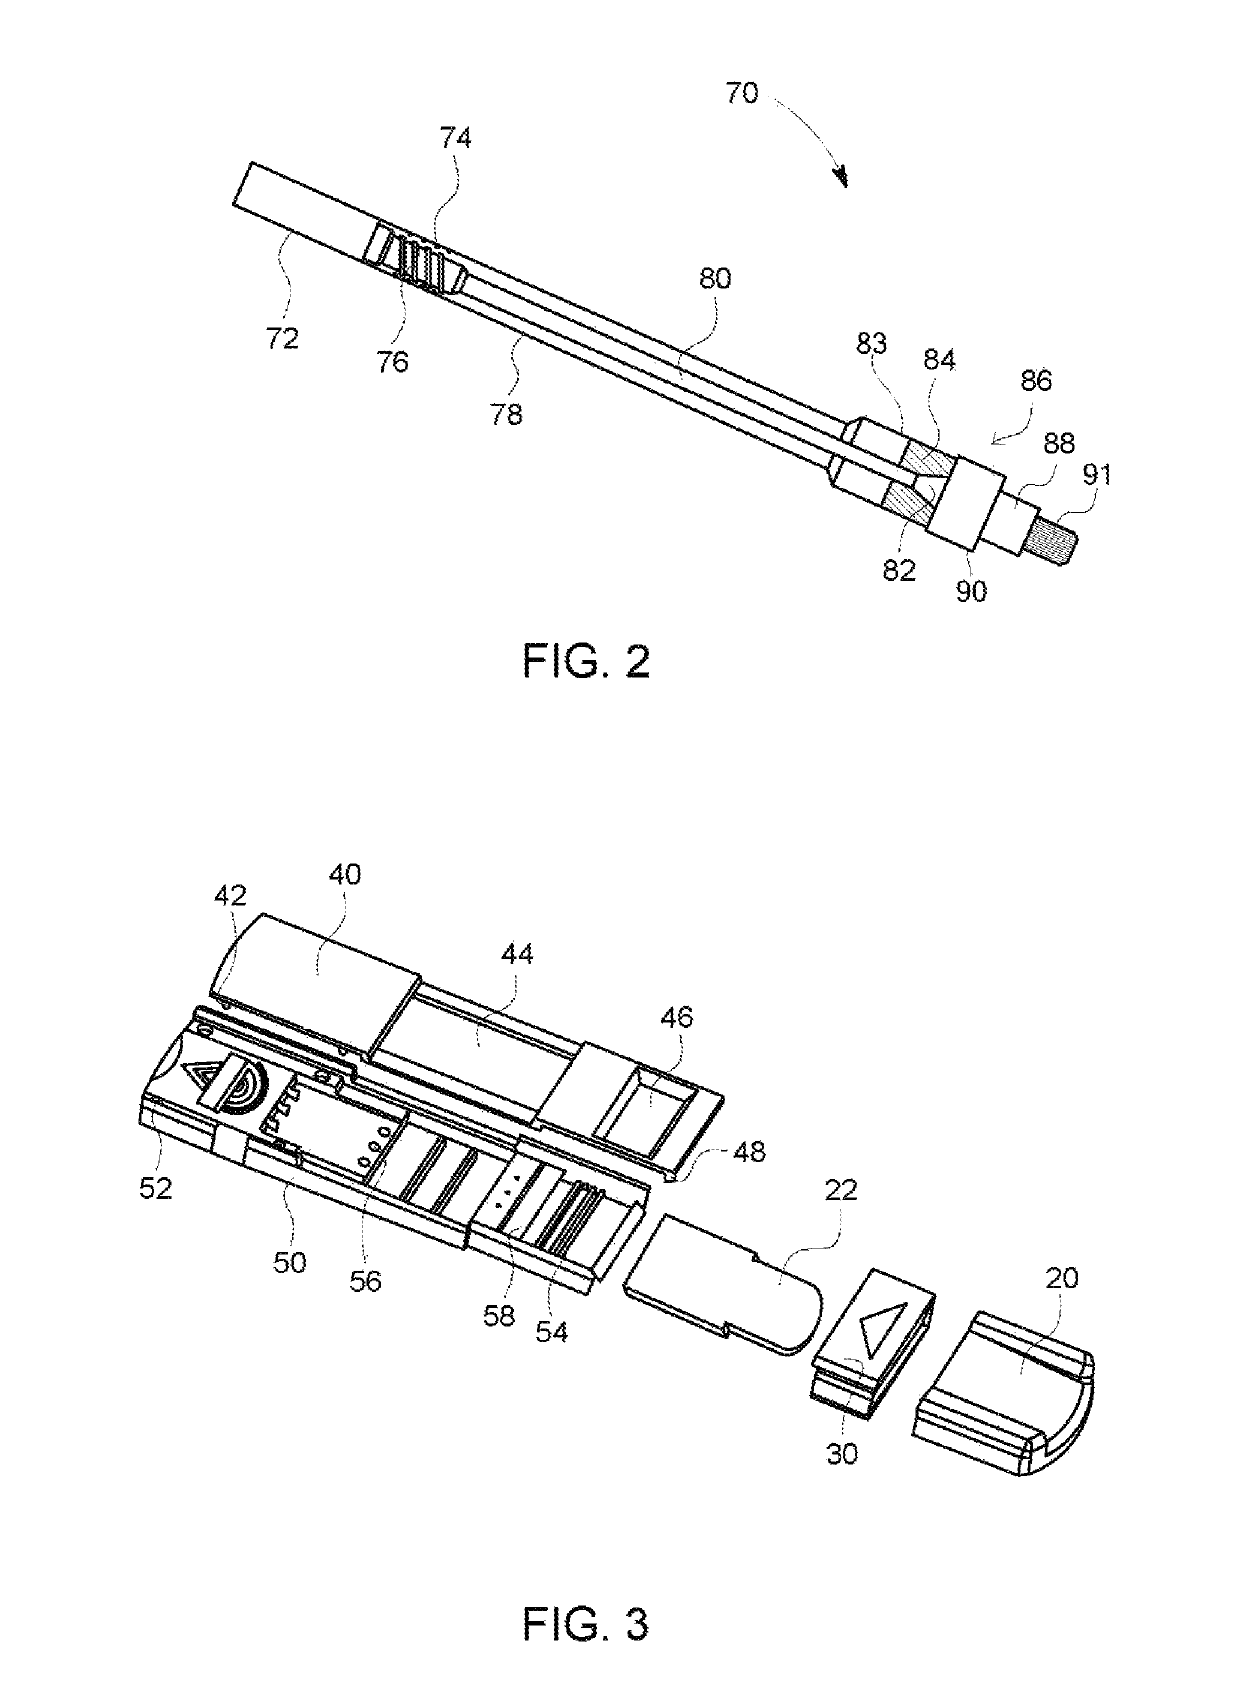 Rapid diagnostic test device and sampling method using driven flow technology